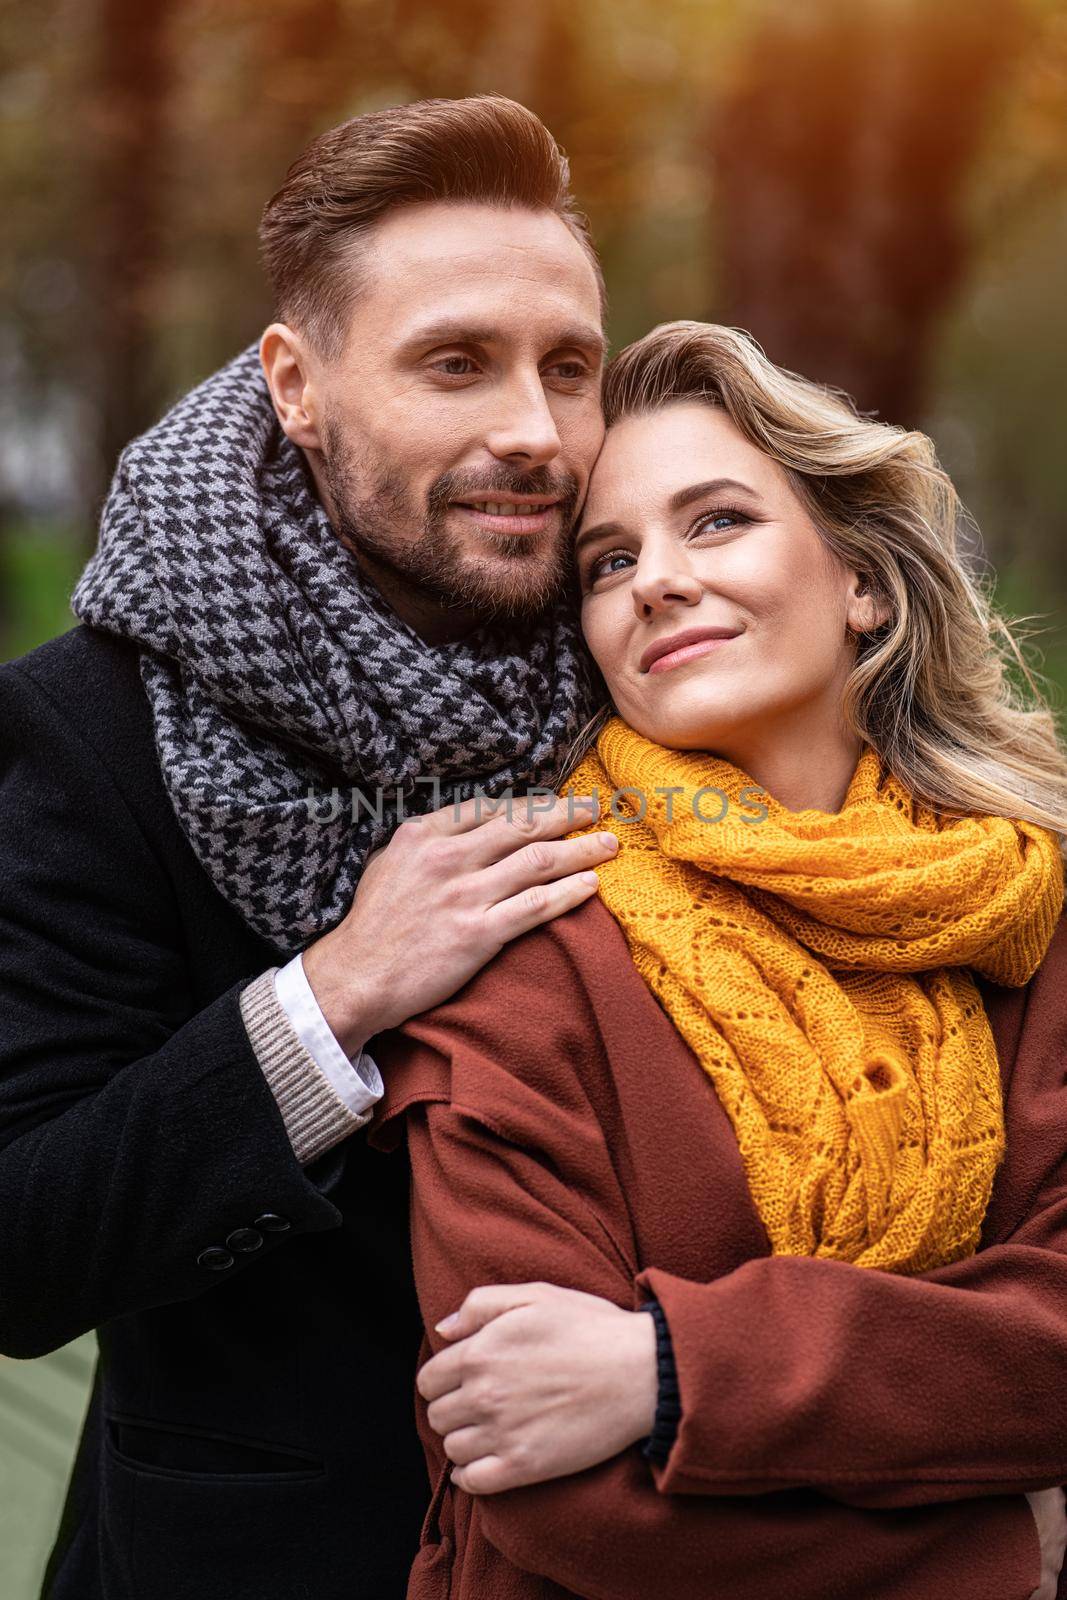 Tenderness of a cute couple. Handsome man and a woman hugged from behind smile looking at each other in the autumn park. Outdoor shot of a young couple in love having great time by LipikStockMedia